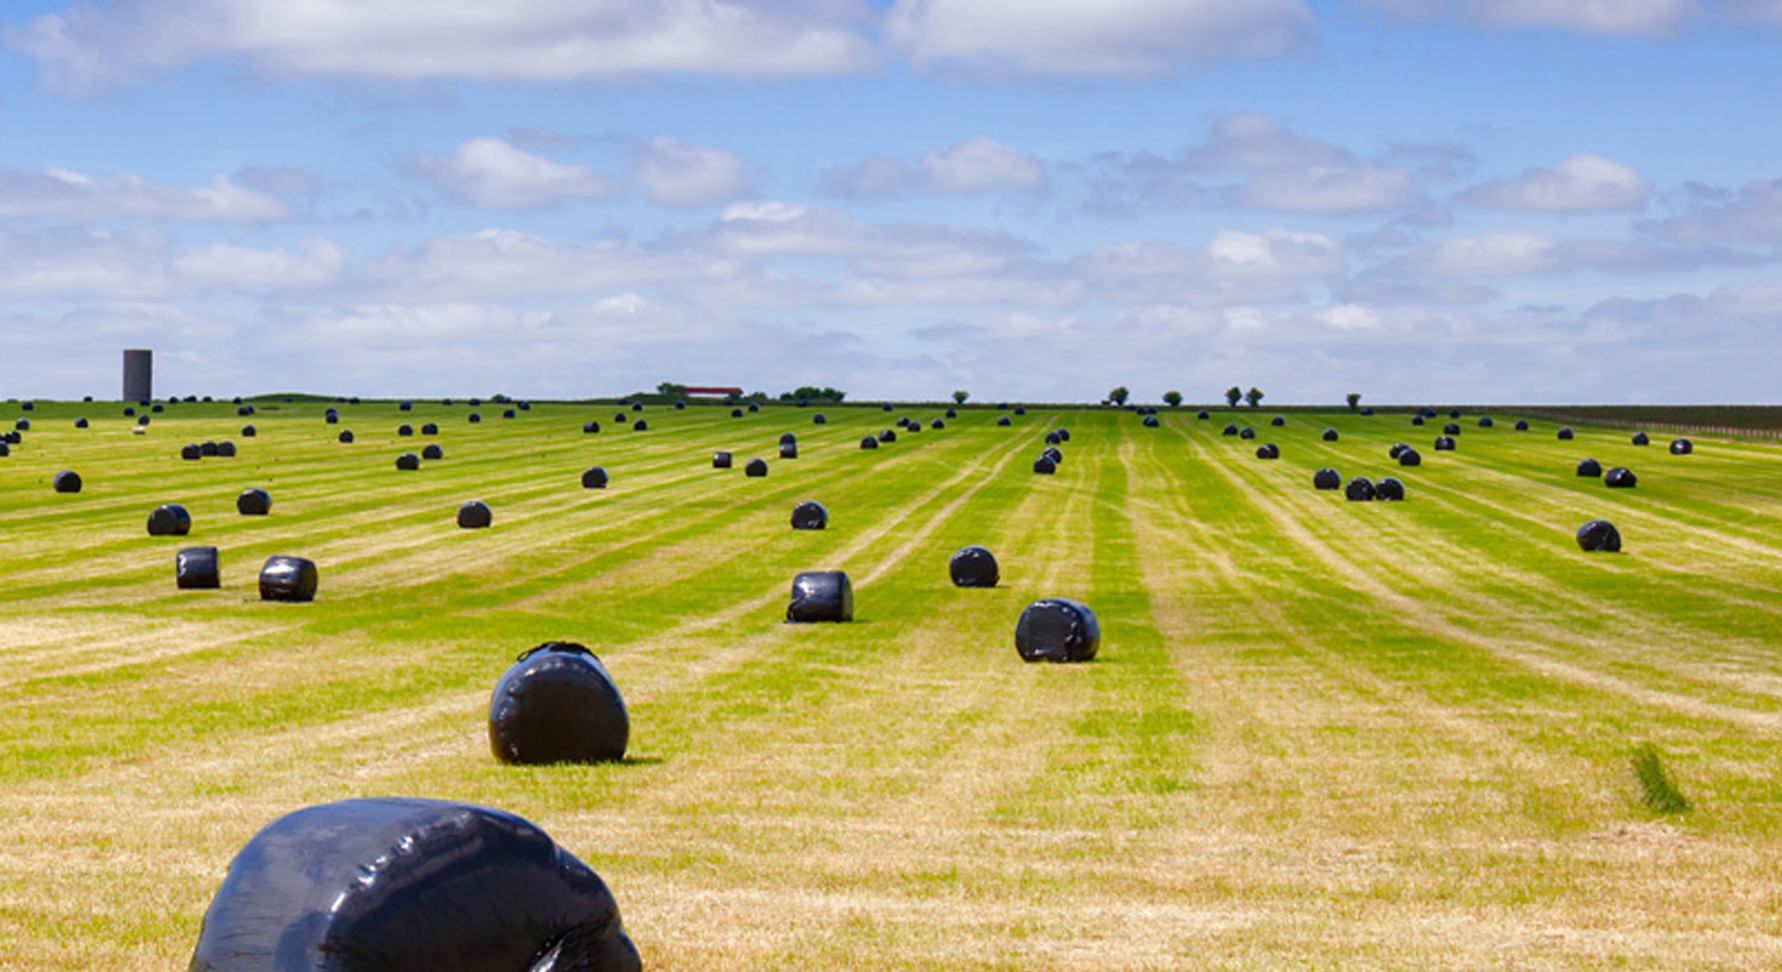 A field with bales of hay wrapped in plastic